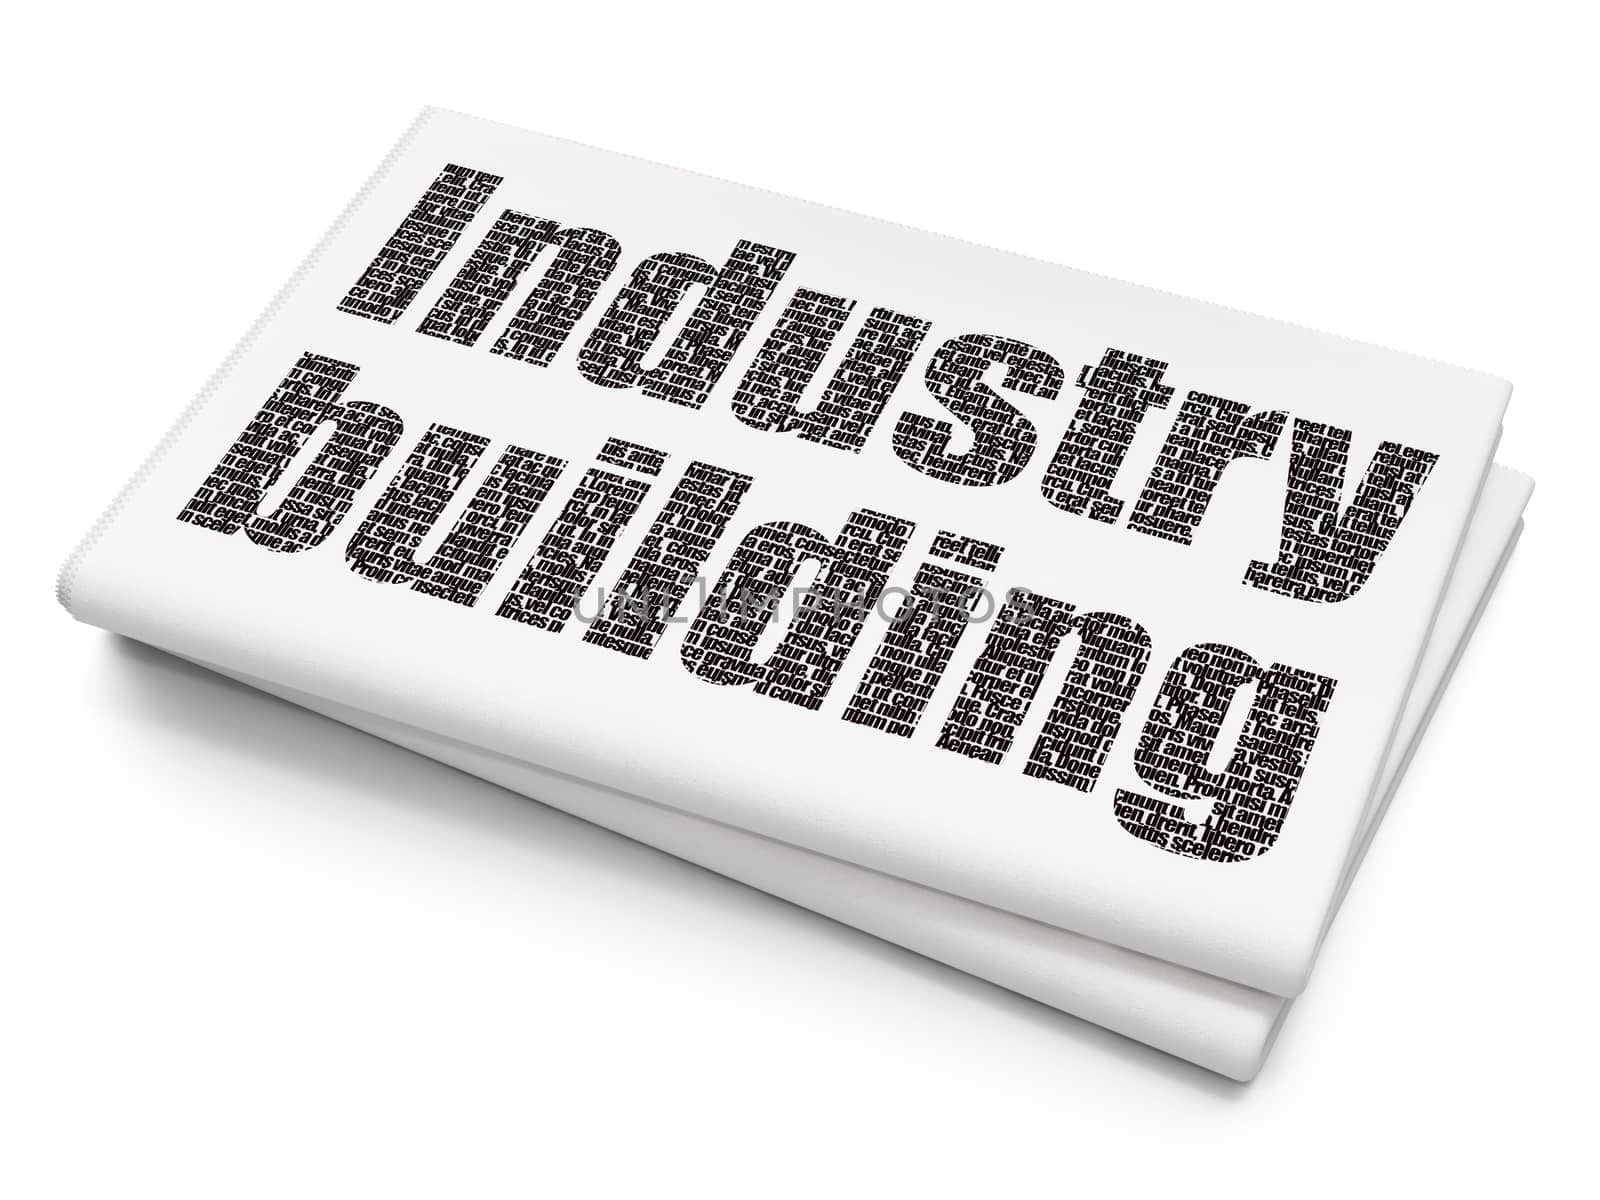 Manufacuring concept: Pixelated black text Industry Building on Blank Newspaper background